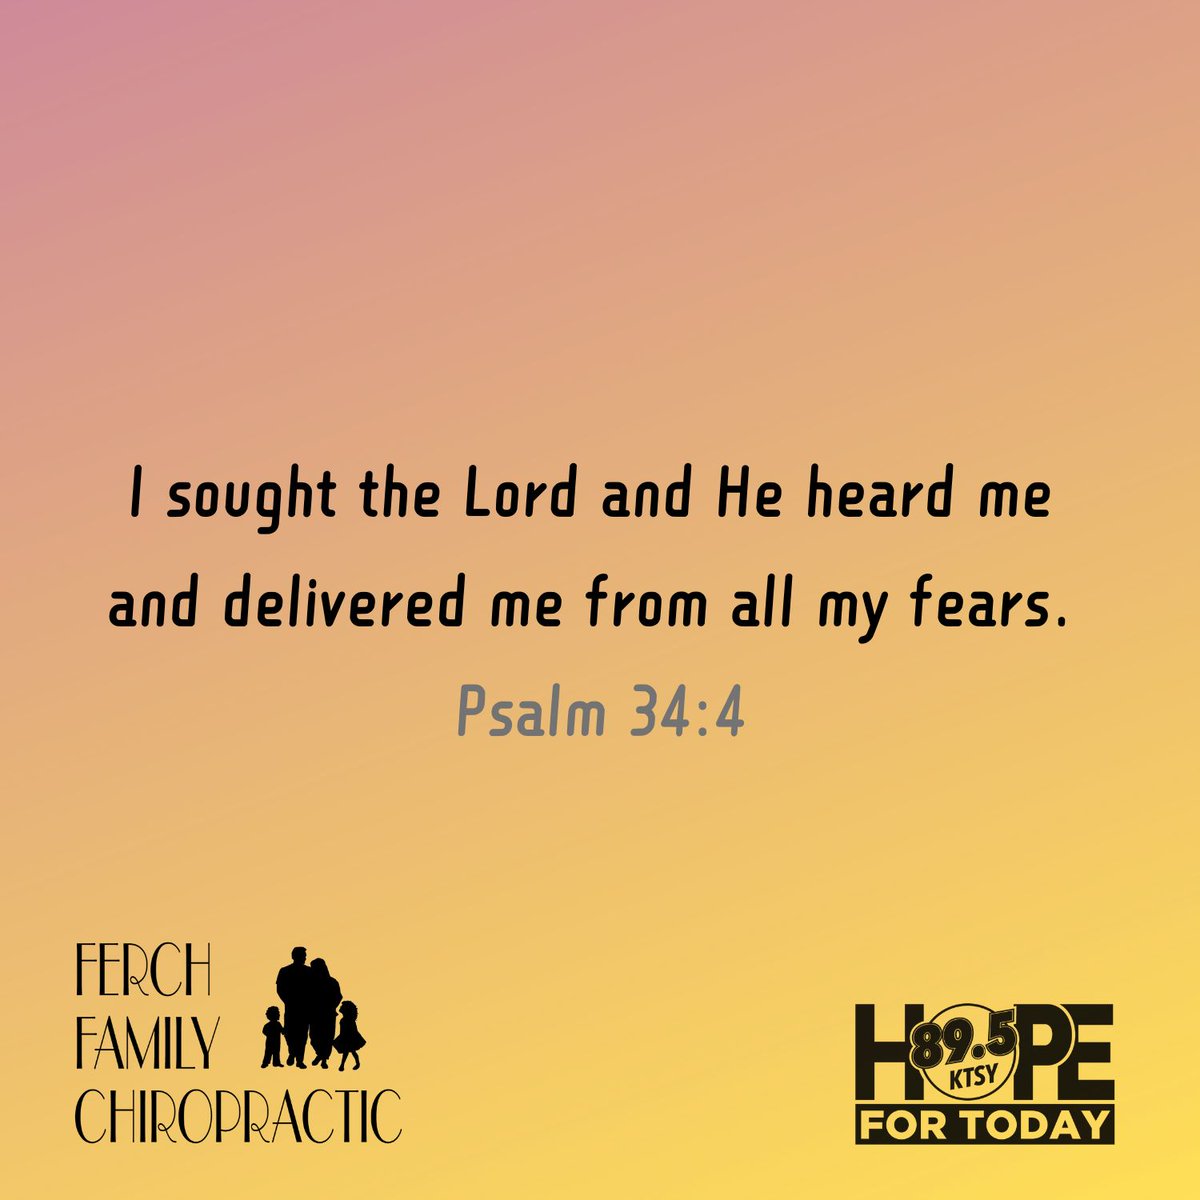 Brings your fears to God today. #hopefortoday #choosehope #bible #scripture